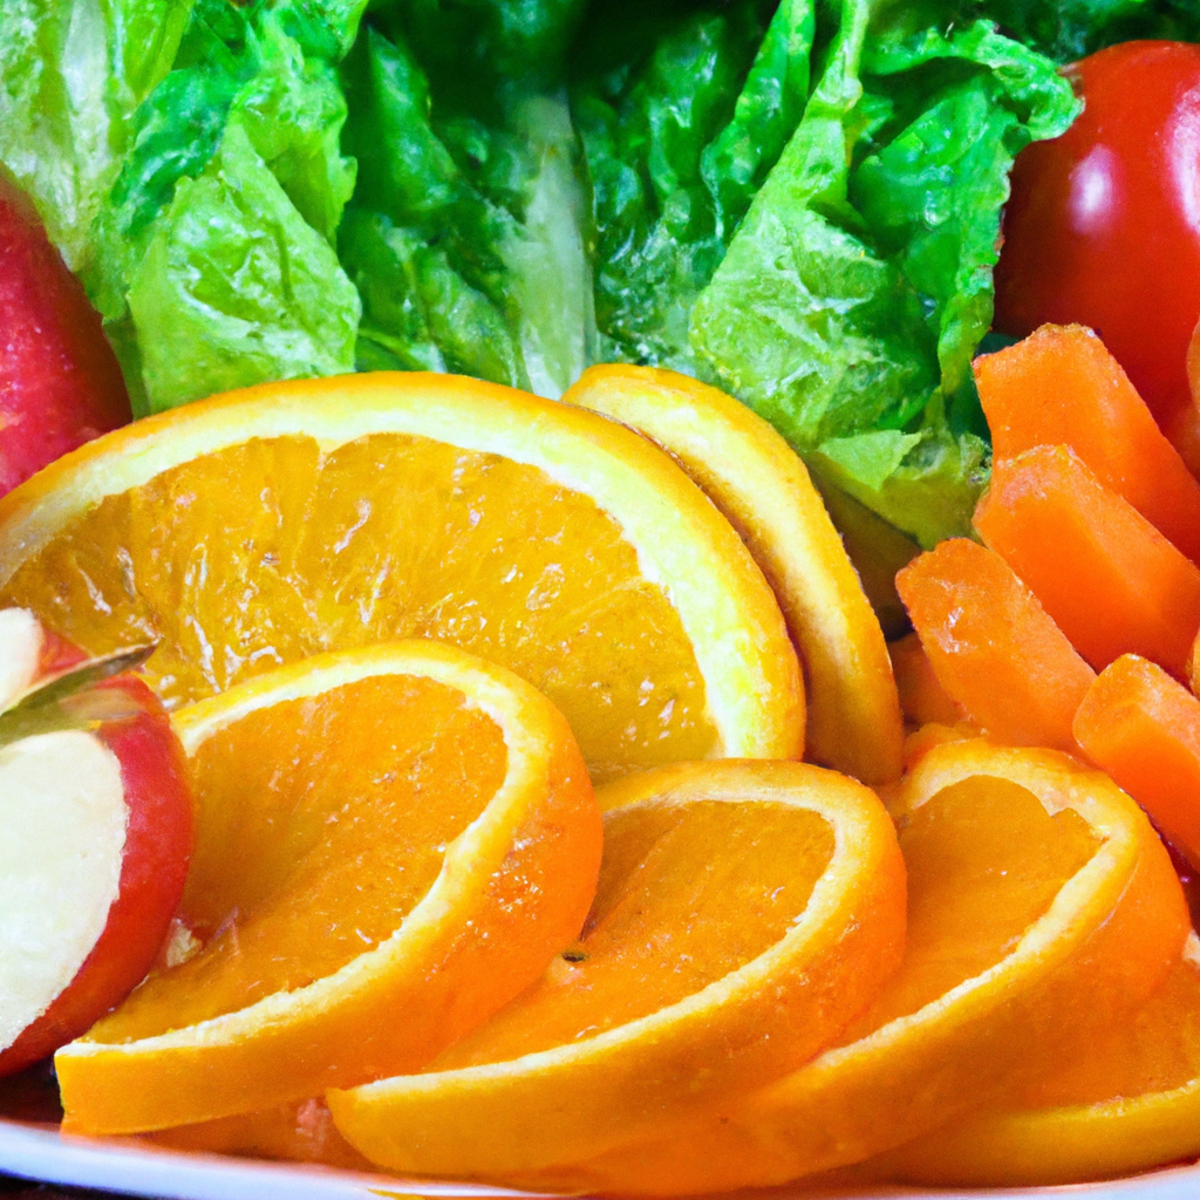 Vibrant plate of fruits and vegetables promoting a balanced diet for individuals with Cystic Fibrosis-Related Diabetes (CFRD).